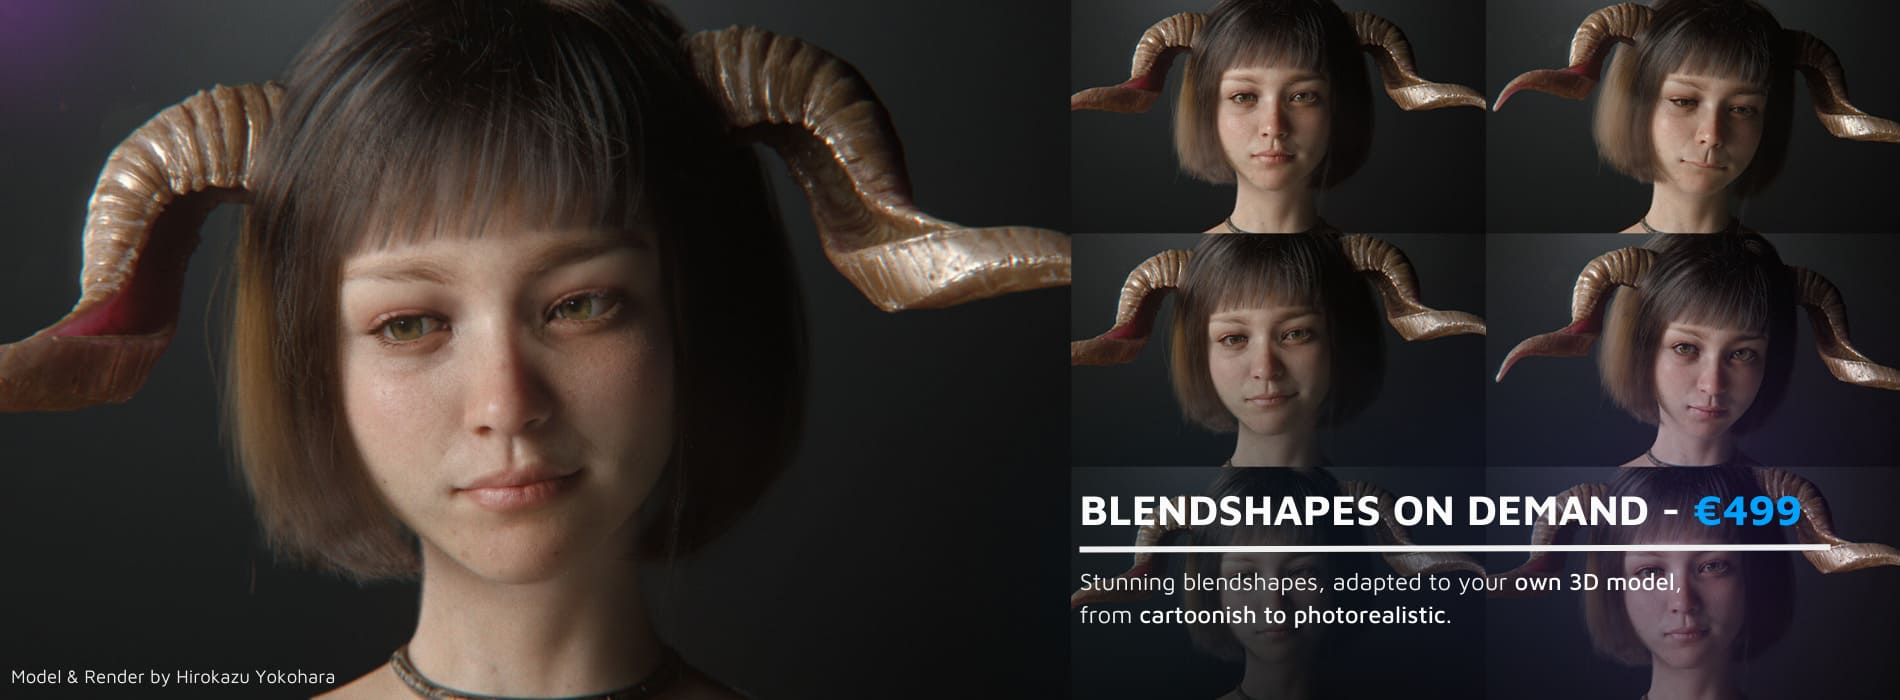 3D model of a girl with horns making different expressions